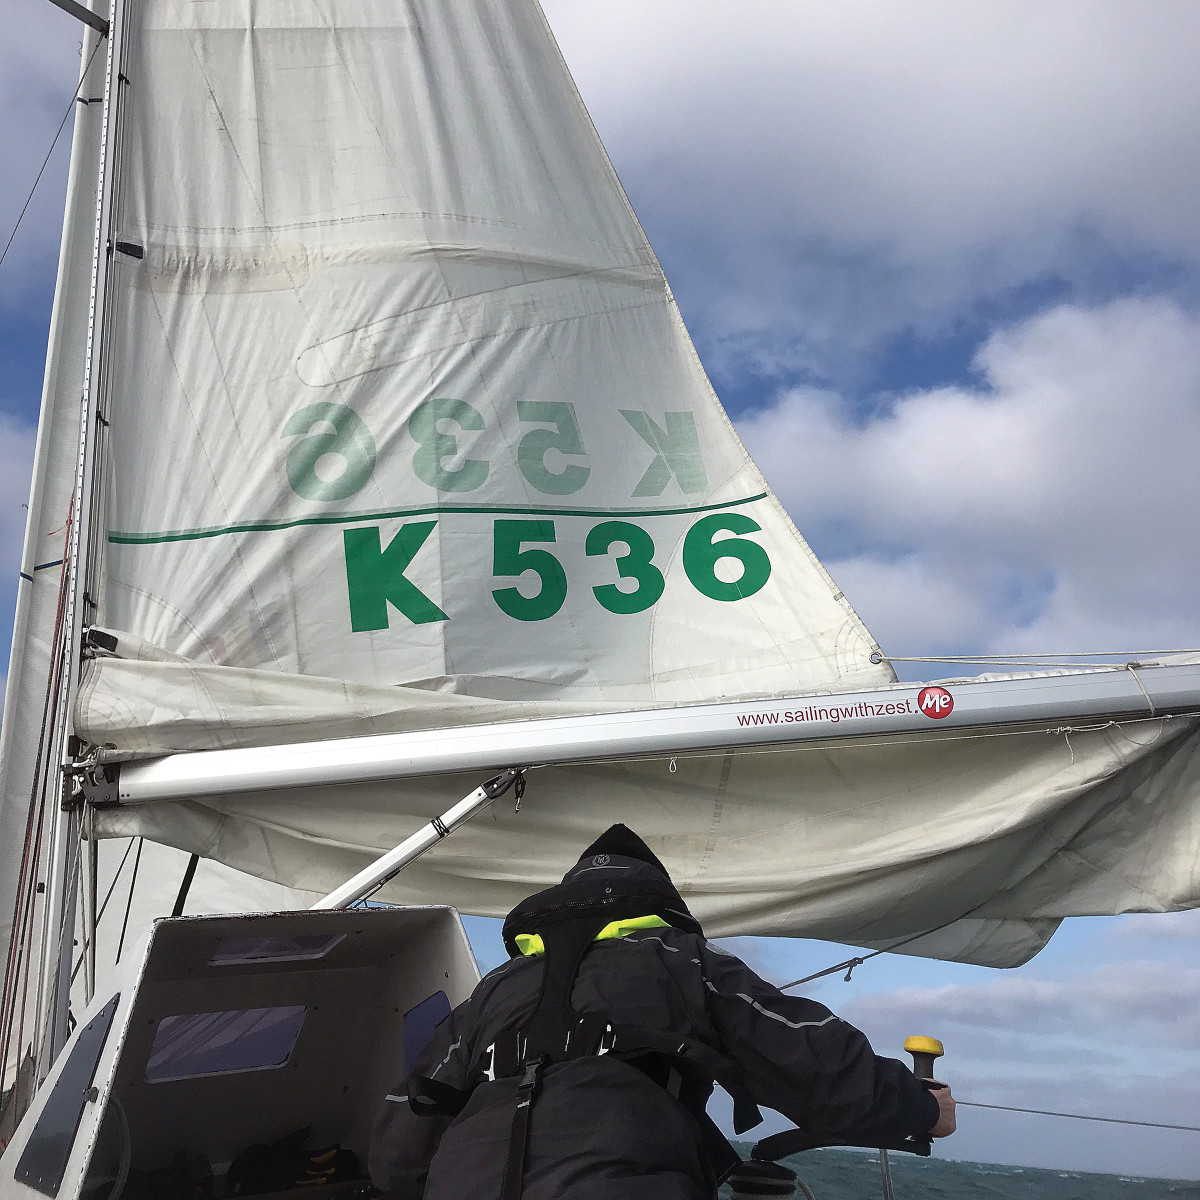 It may not be pretty, but reefing while sailing downwind means not having to fight a spike in the apparent wind